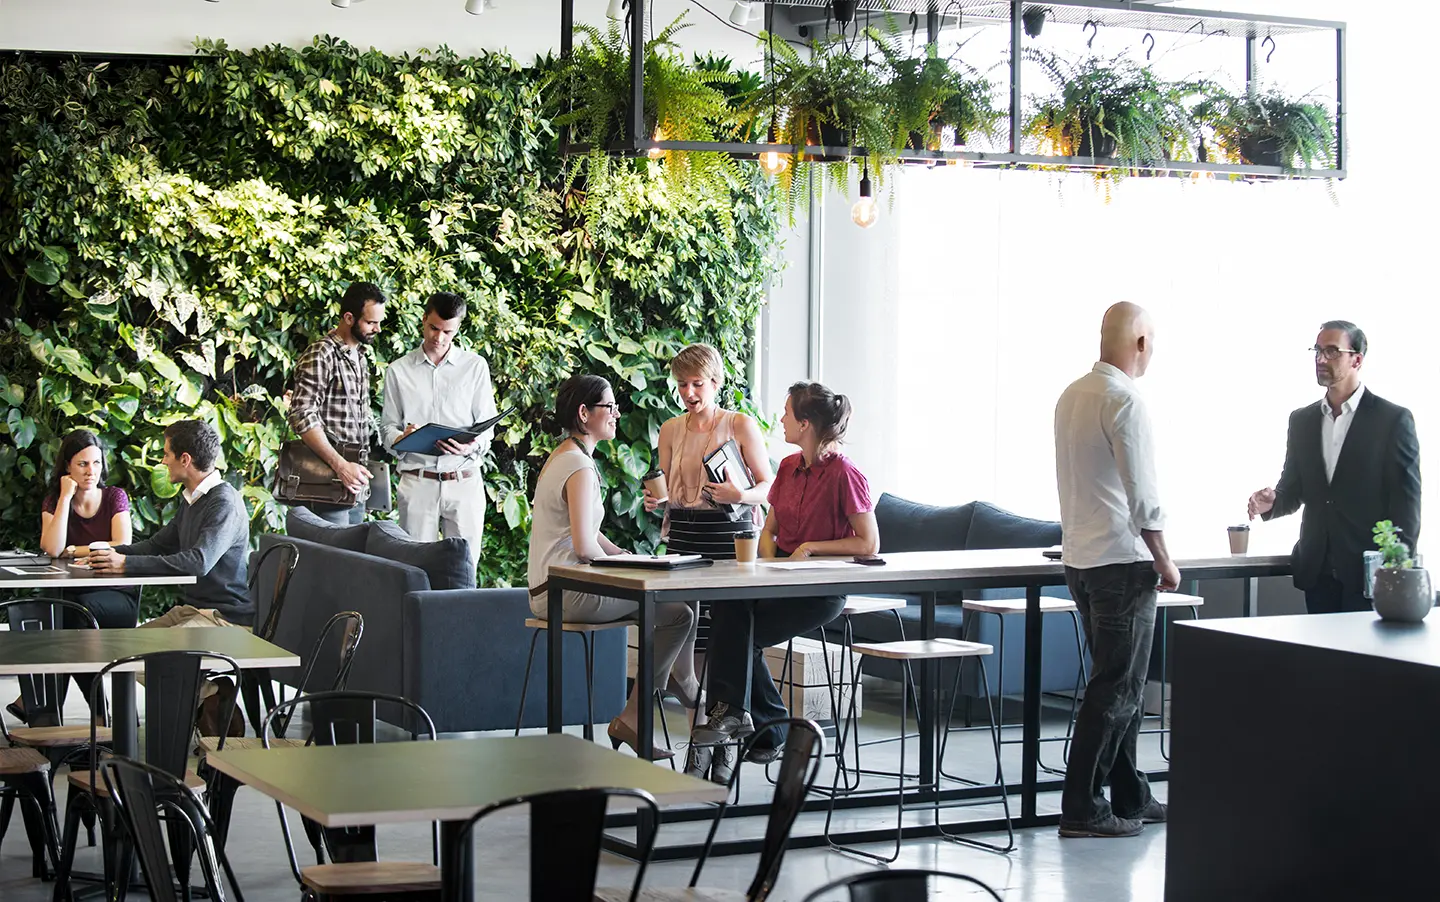 The well-being of your employees is improved with plants in their environment.